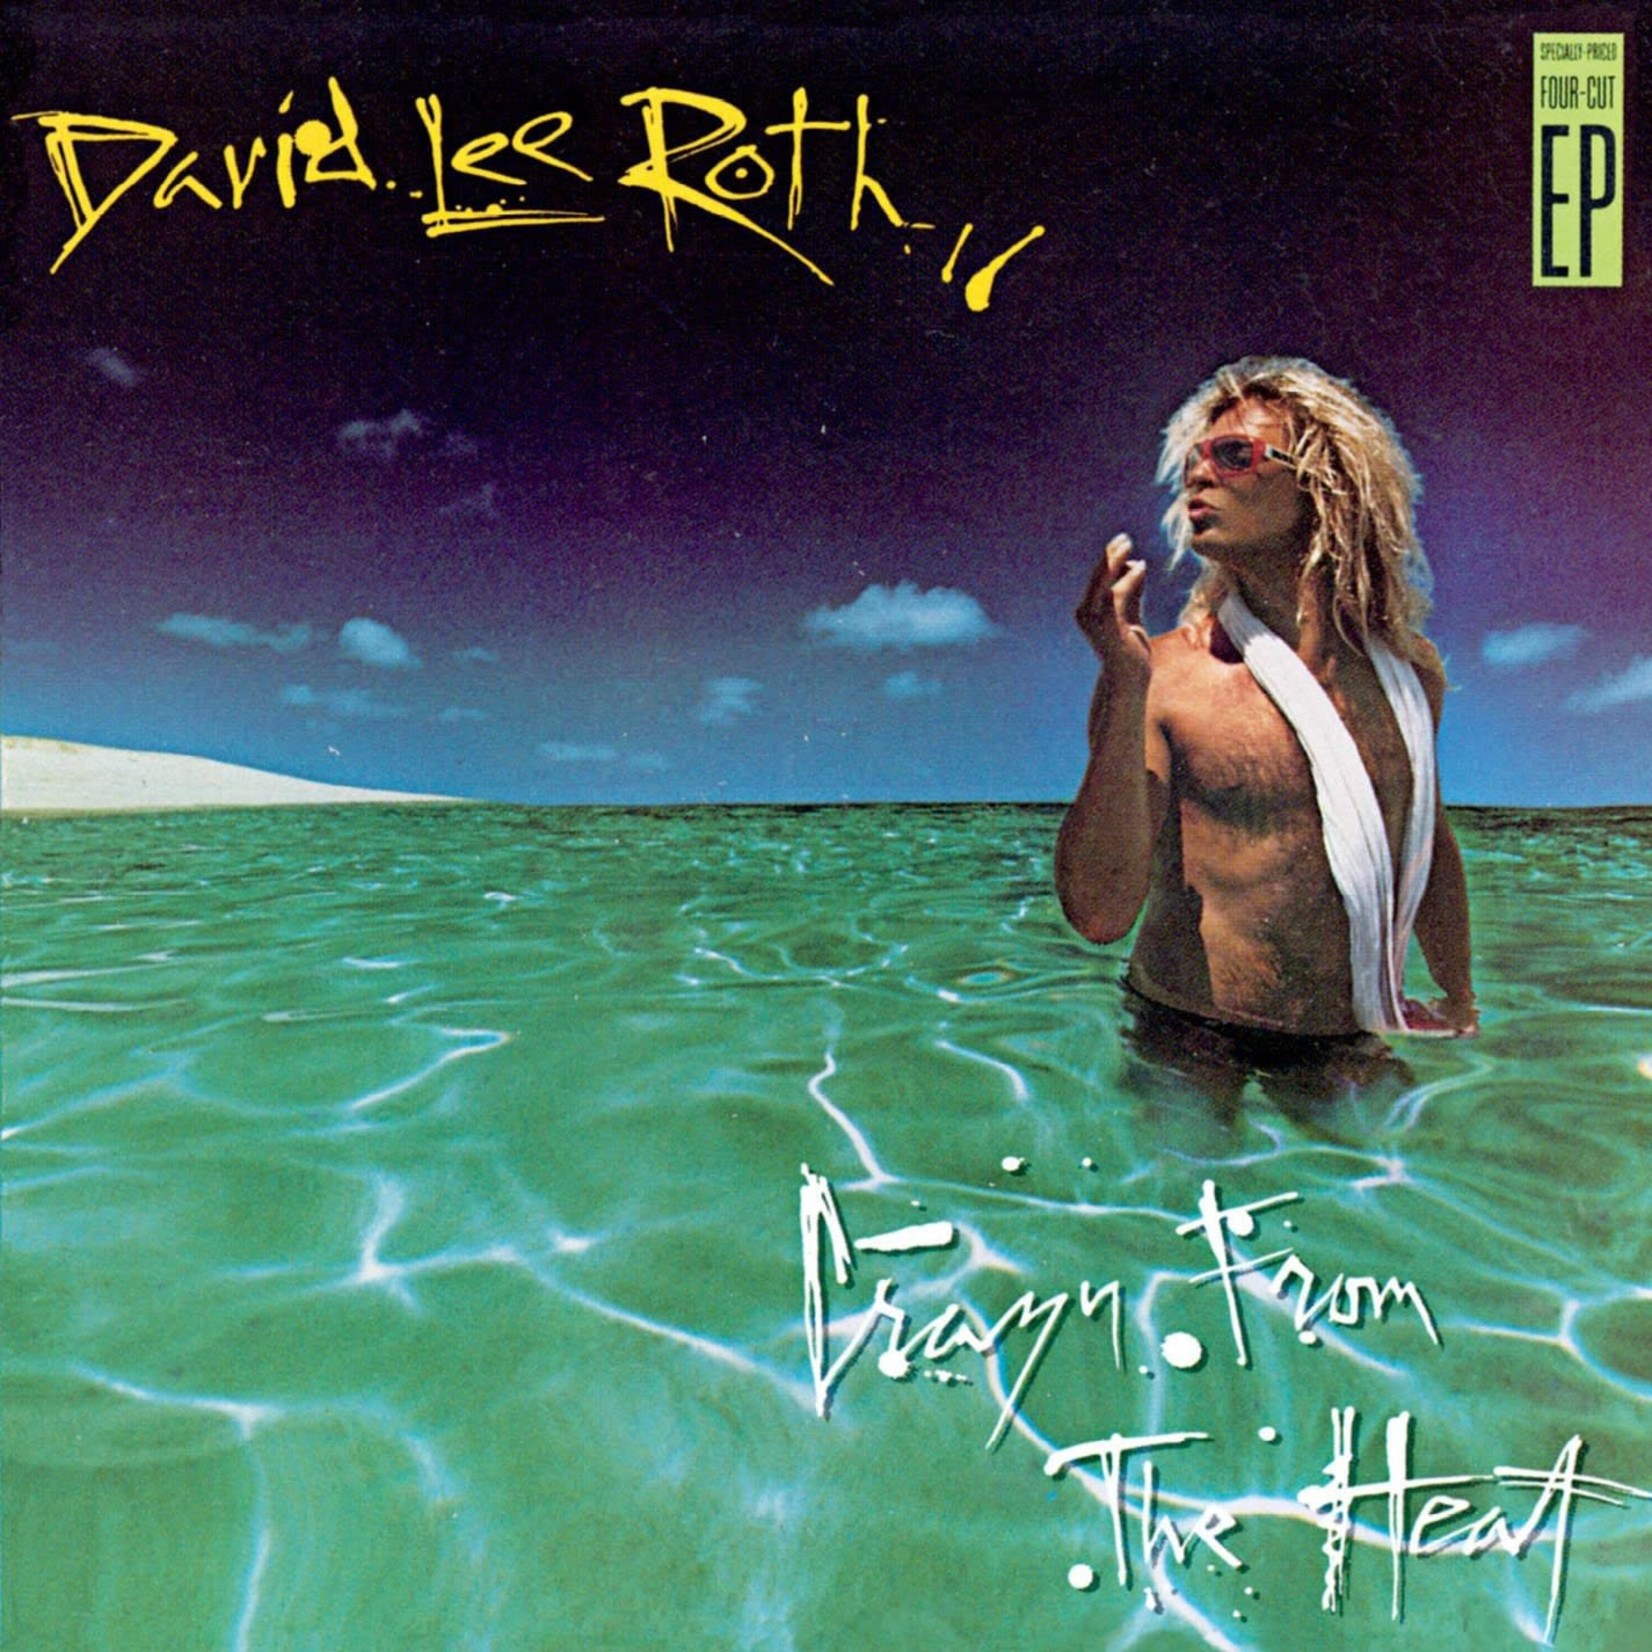 [Vintage] David Lee Roth - Crazy From the Heat, & not being as good as Sammy Hagar